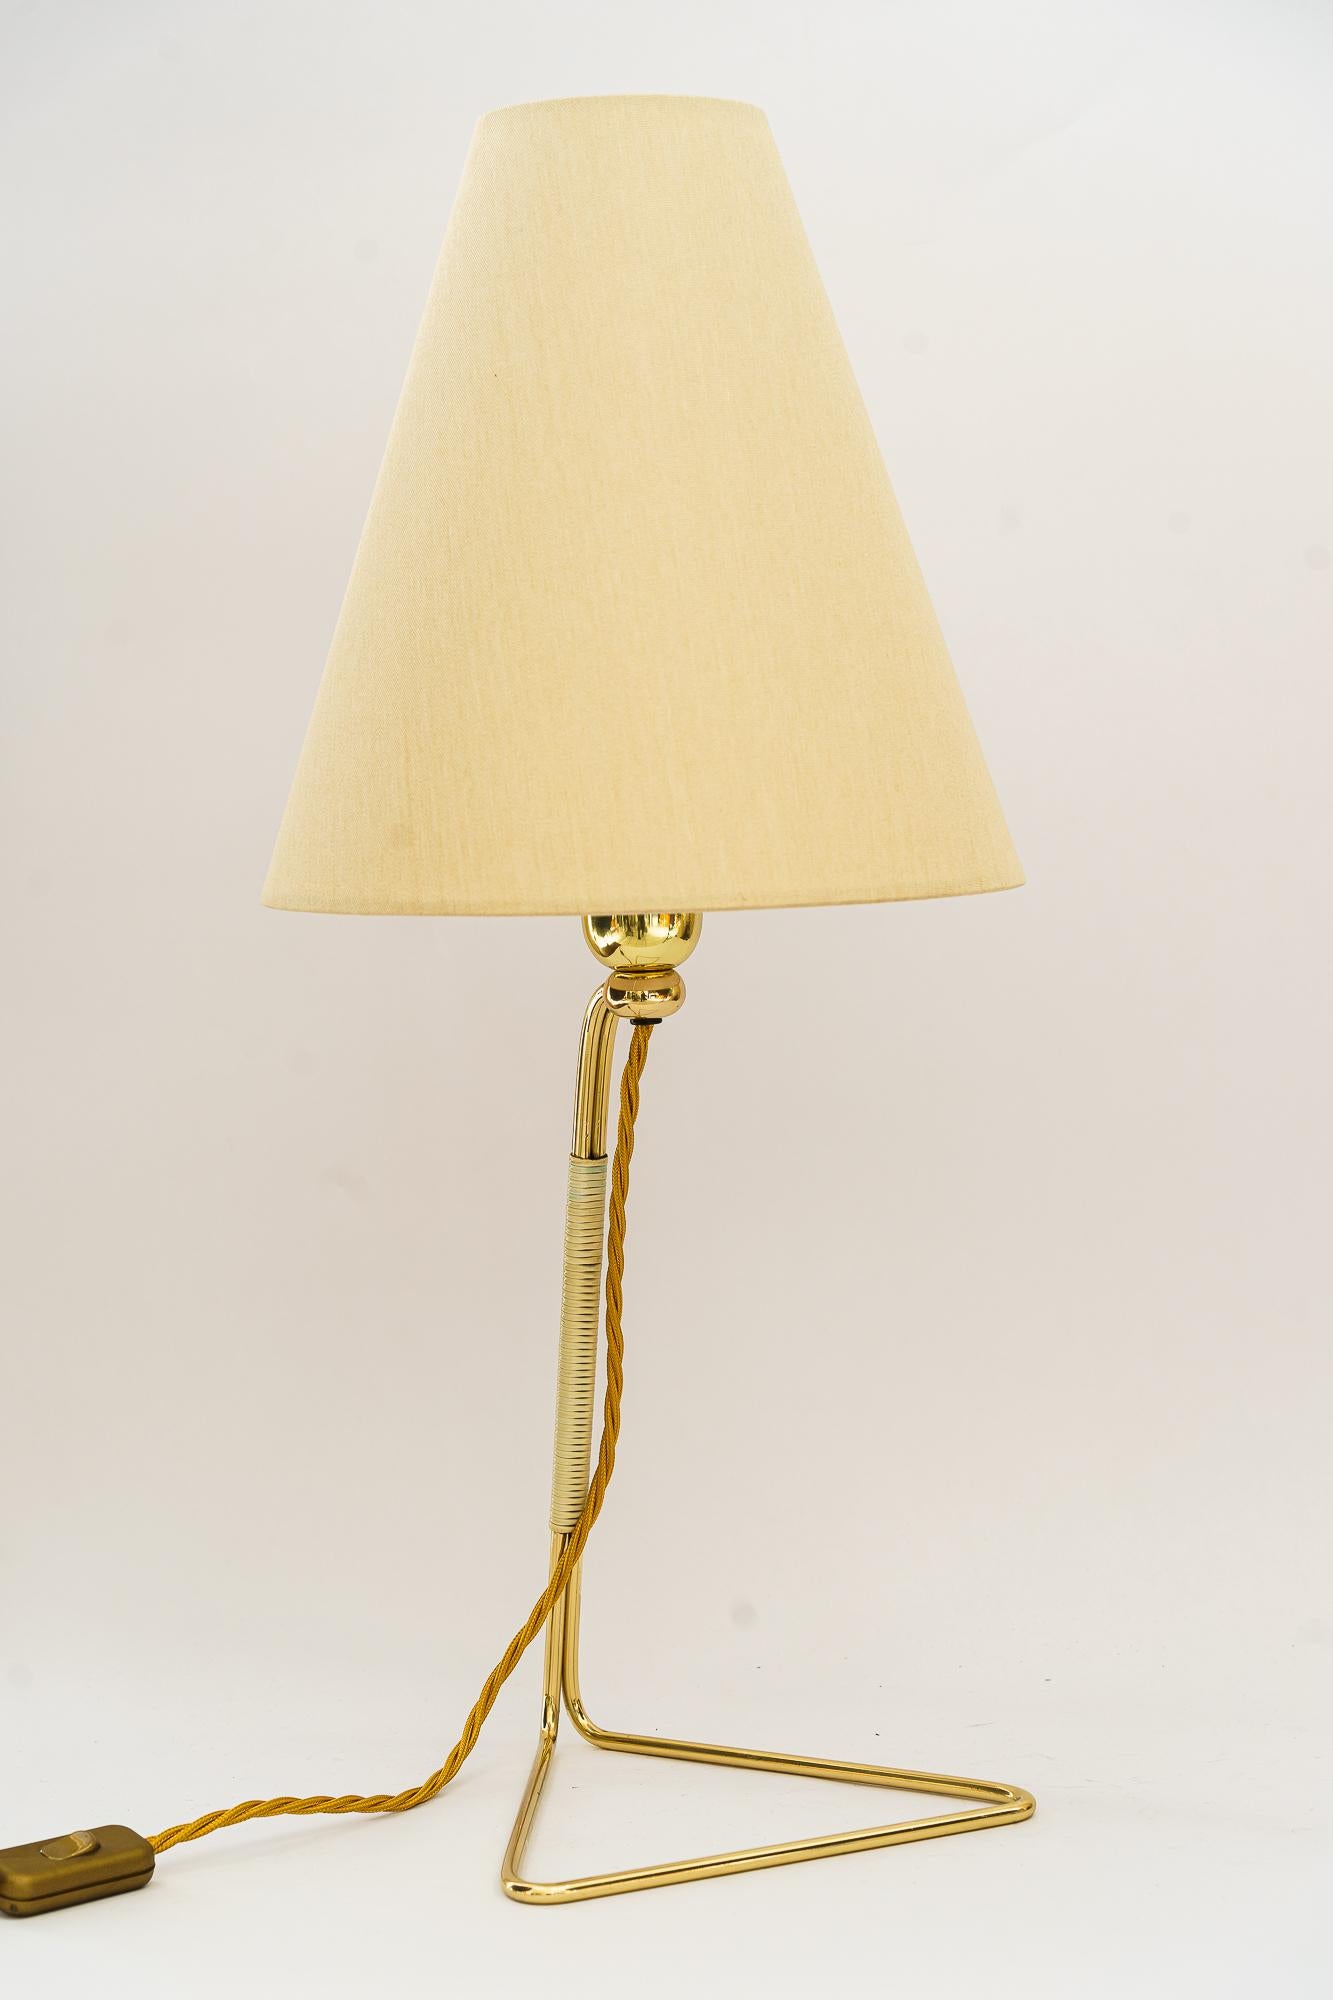 Rupert Nikoll table lamp vienna around 1950s
Brass polished and stove enameled
The fabric shade is replaced ( new )